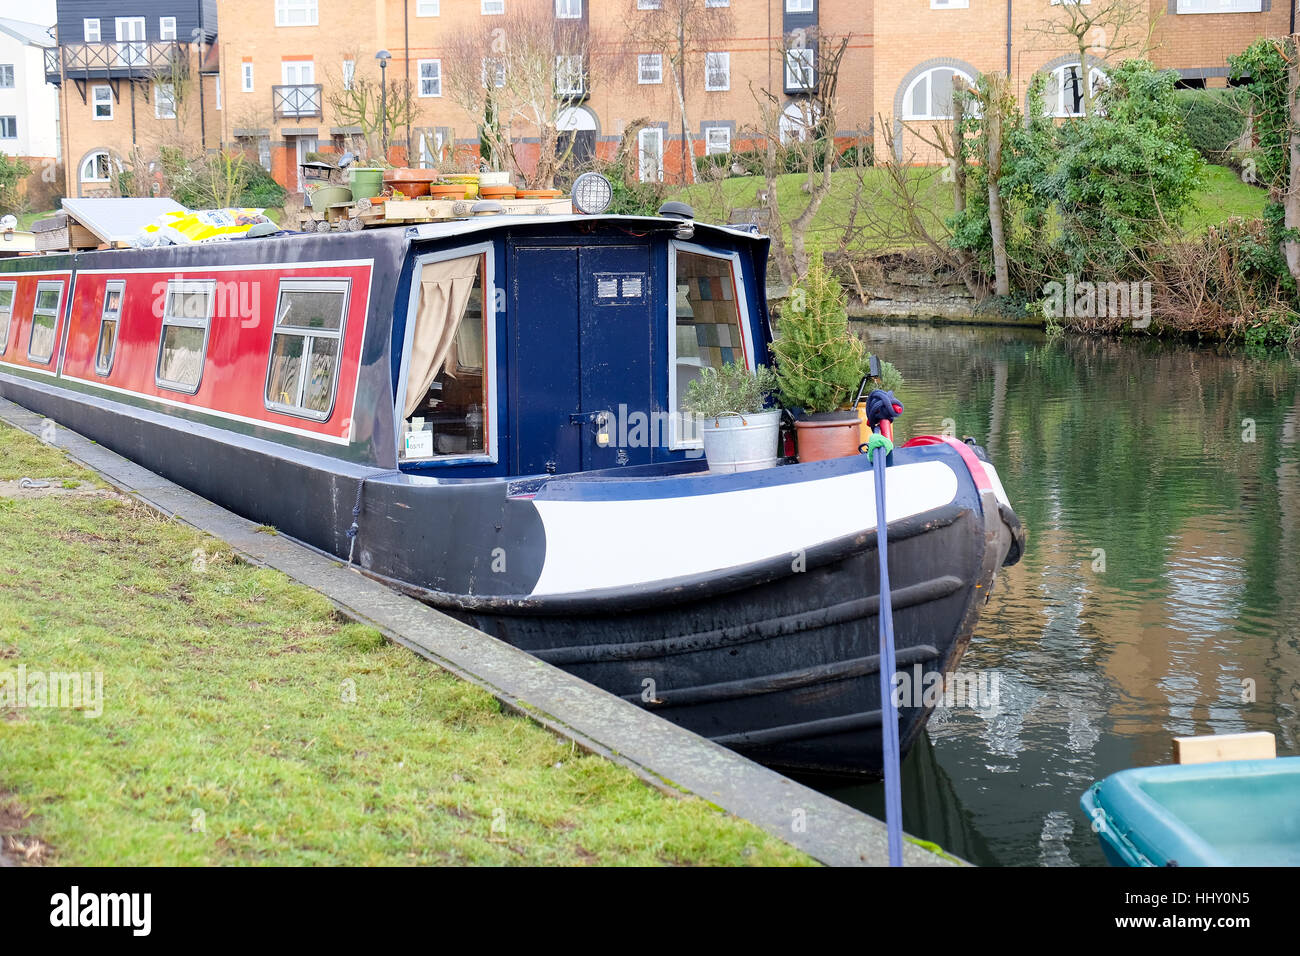 A blue and red barge moored on a canal in Hertford, England Stock Photo